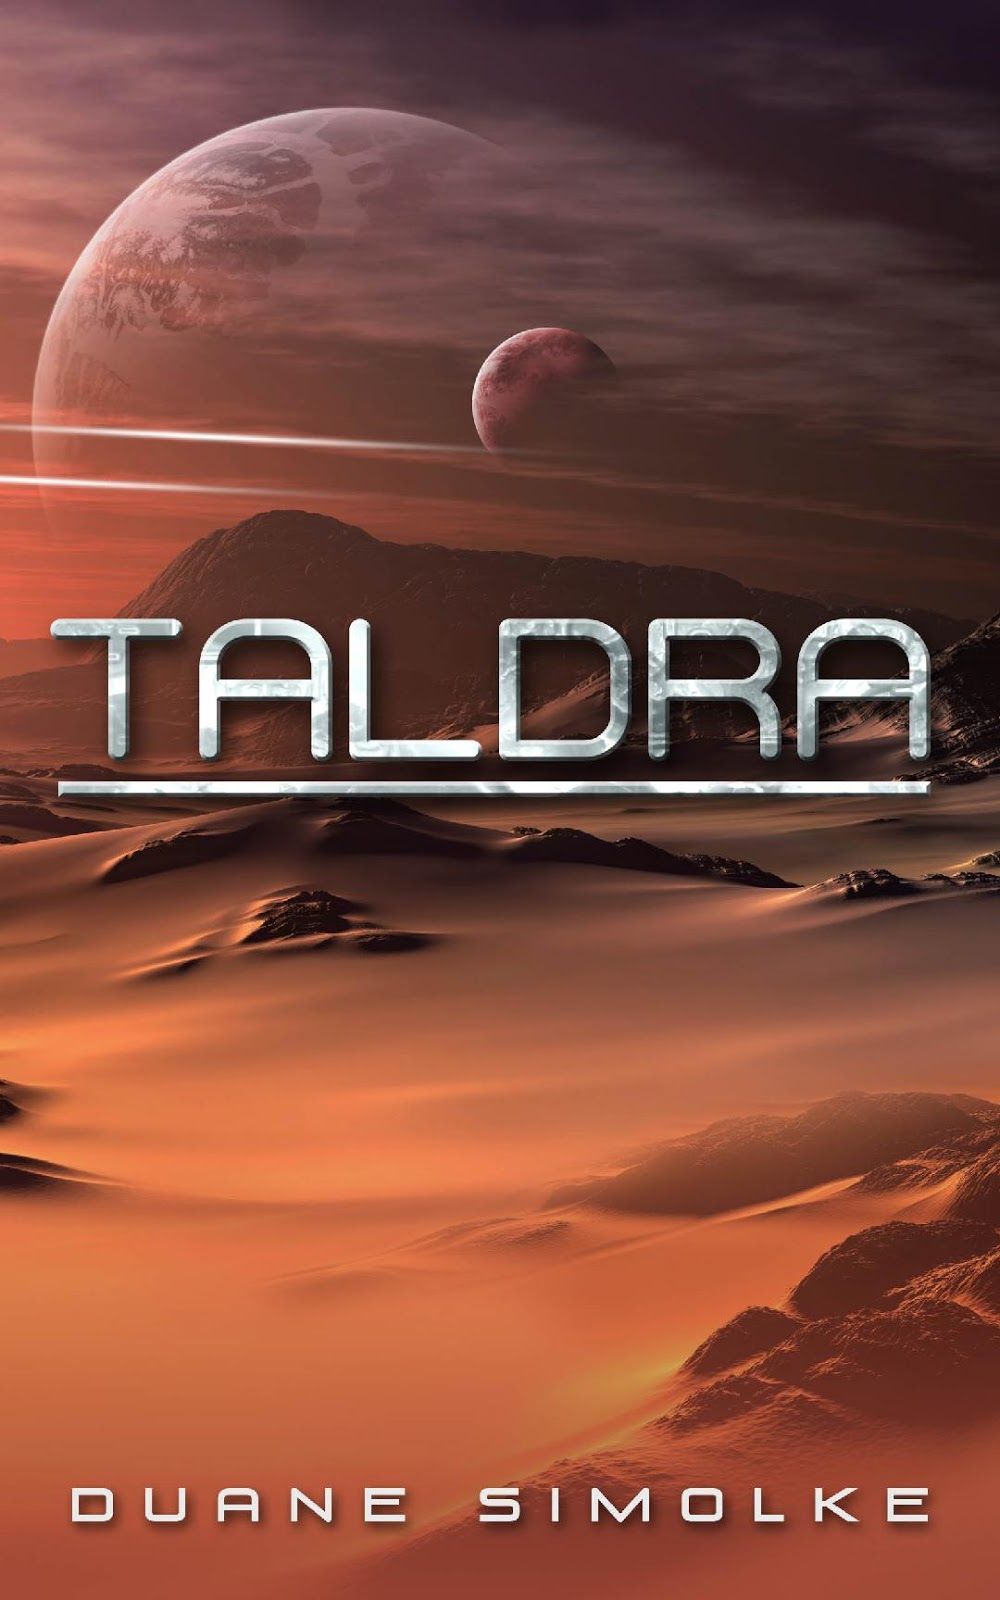 Taldra: Two Science Fiction Adventures's Book Image